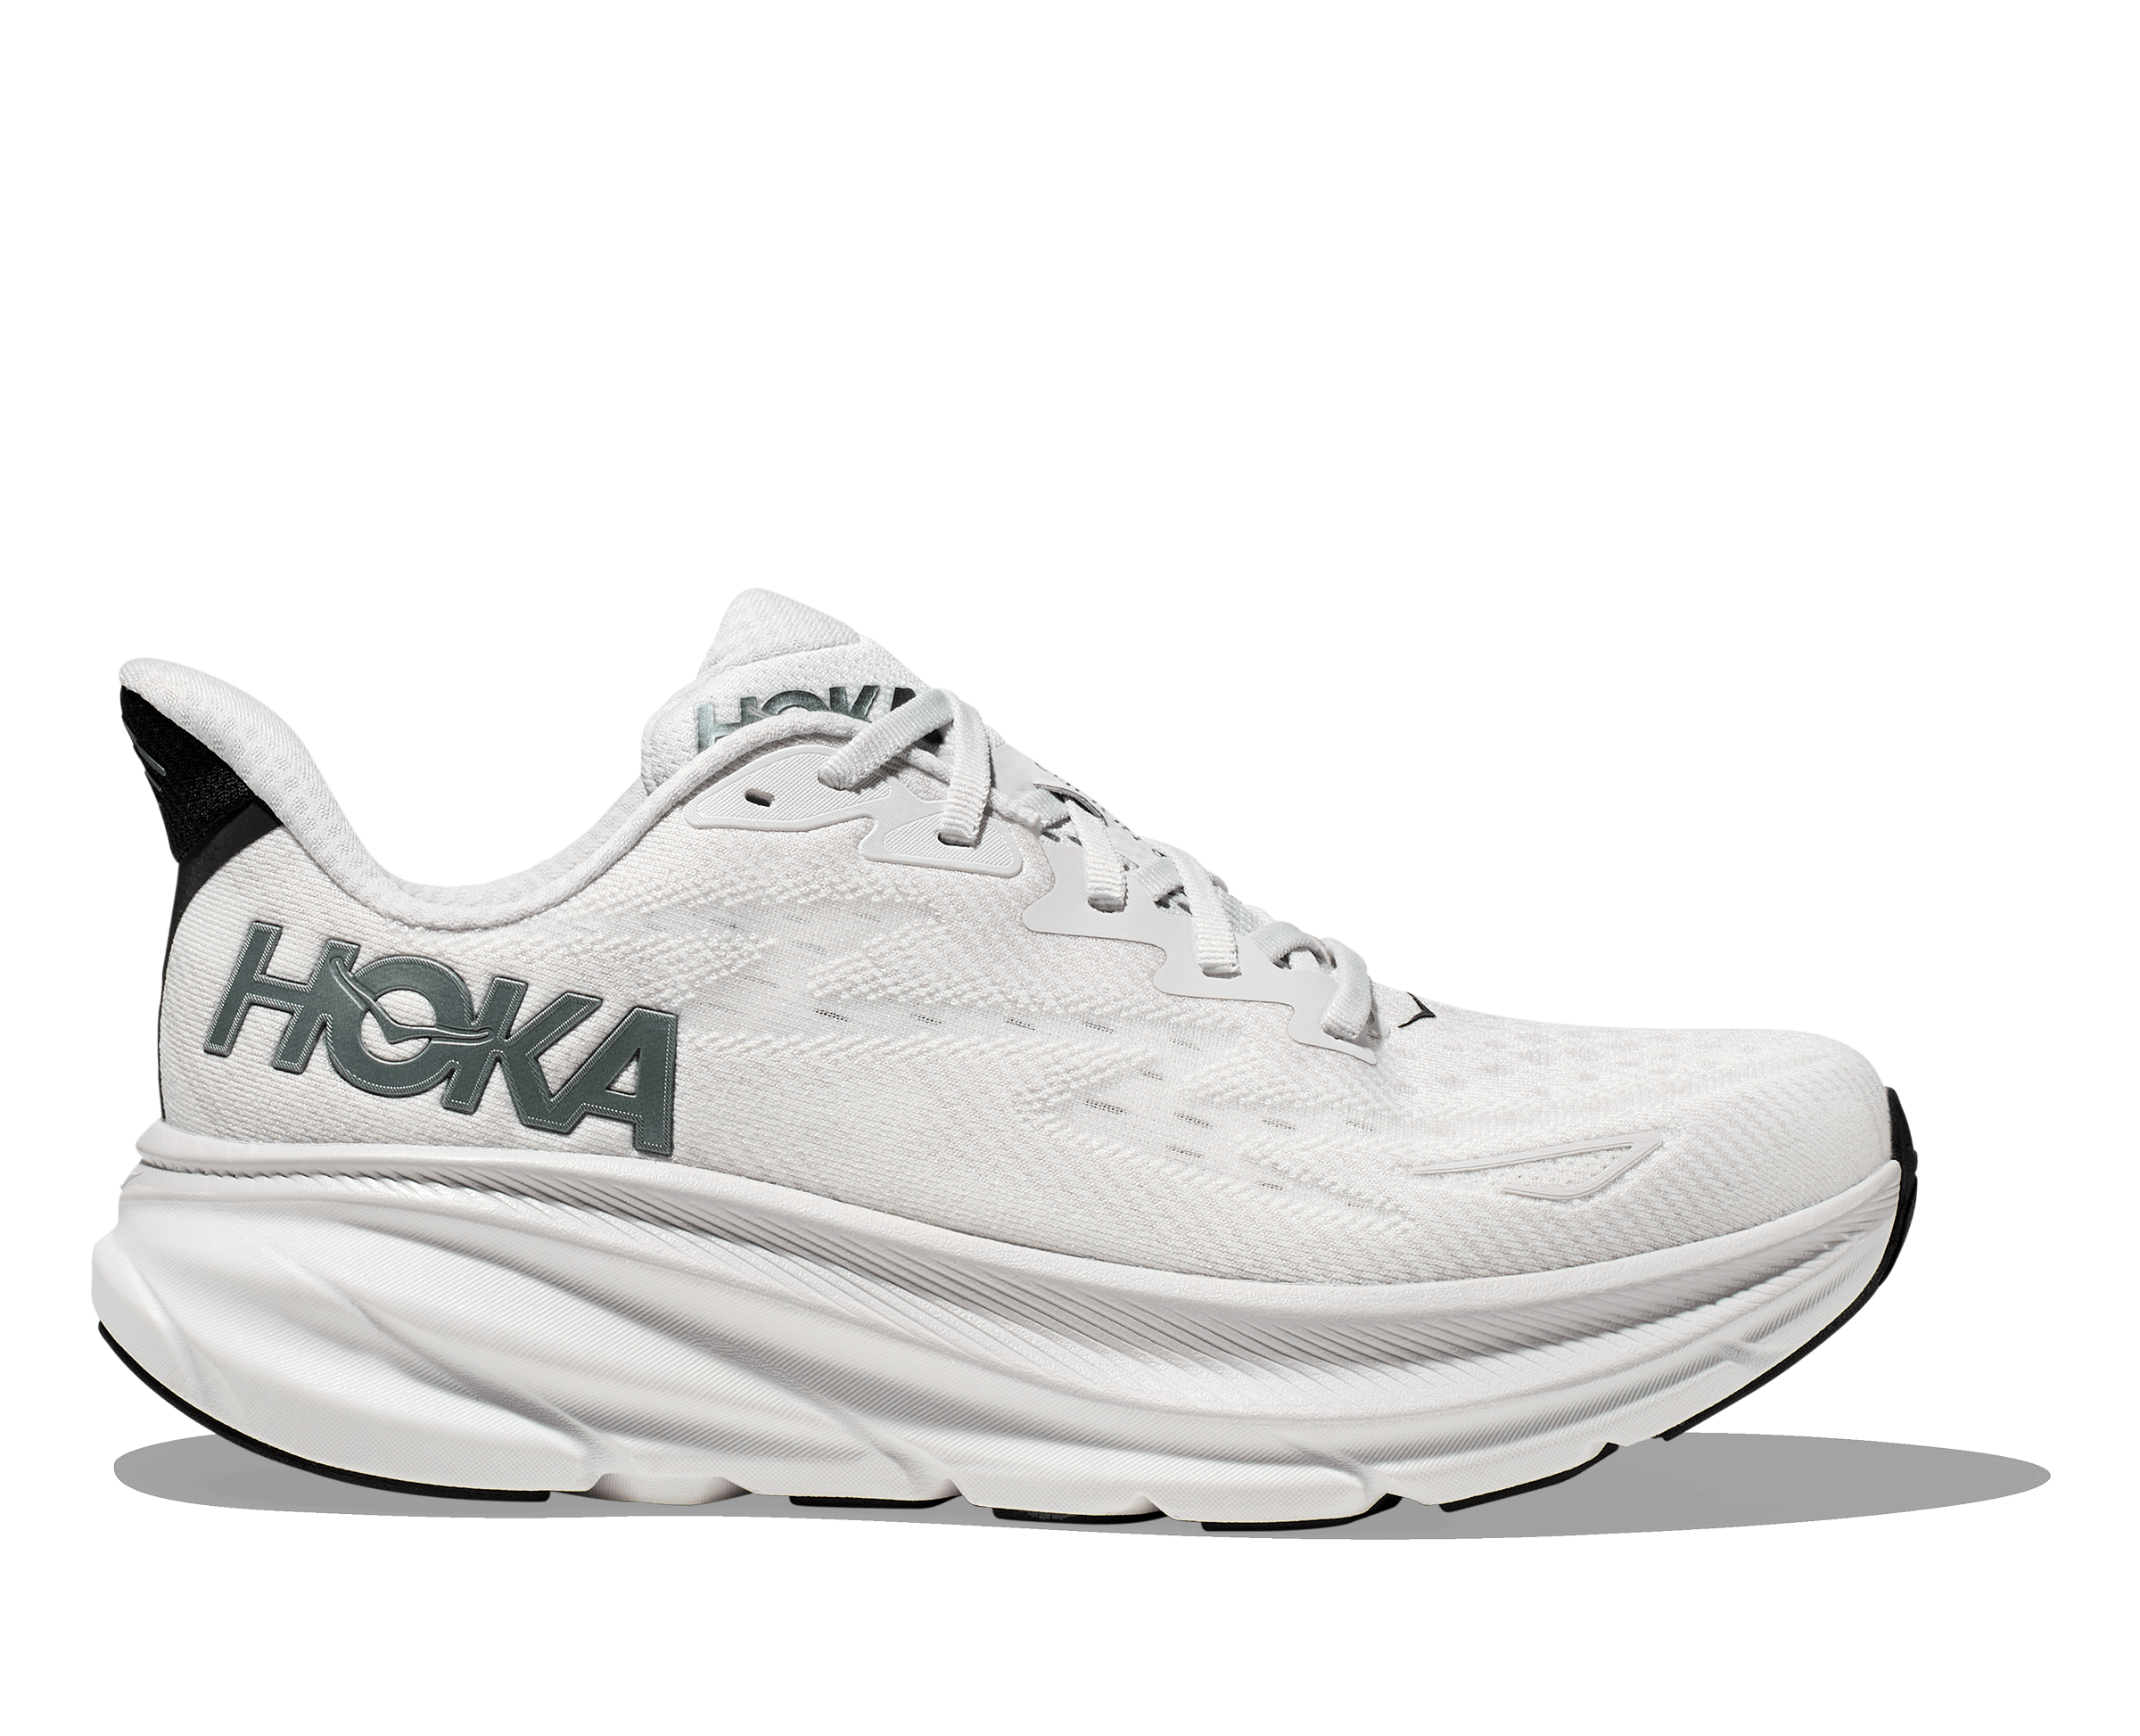 Lateral view of the Men's Clifton 9 by HOKA in the color Nimbus Cloud/Steel Wool